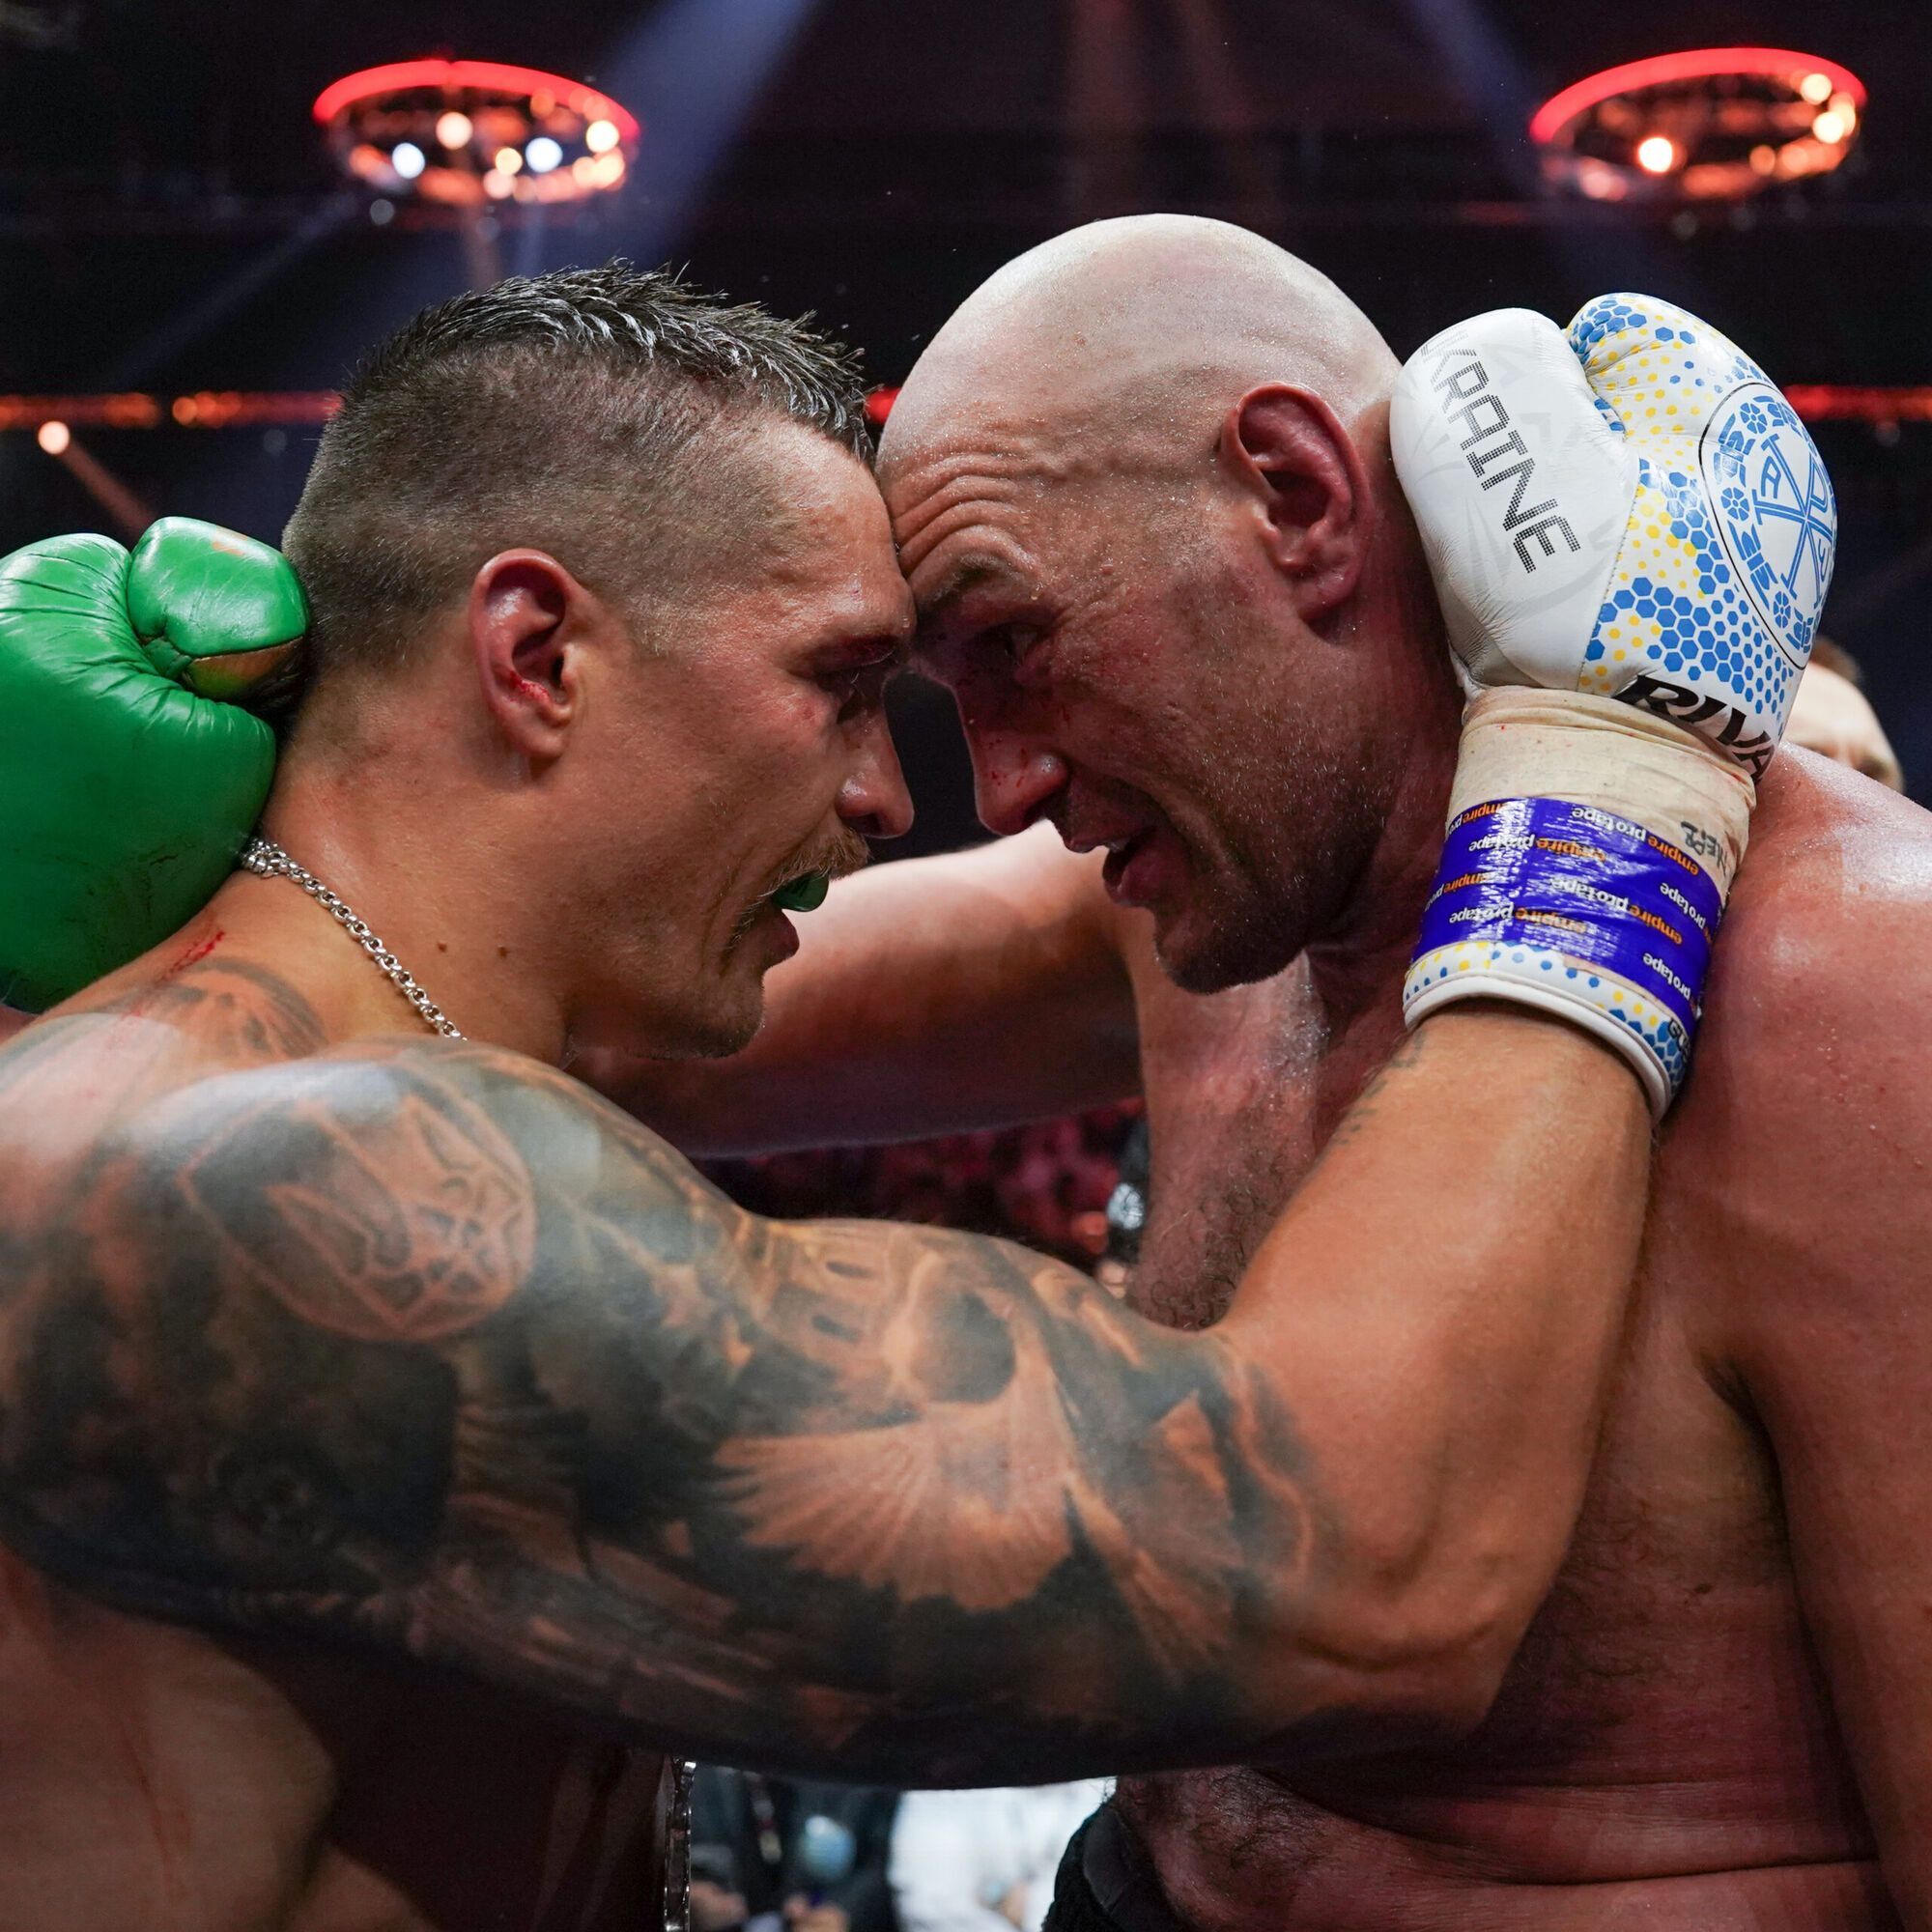 WBO heavyweight champion says what will happen in the rematch between Usyk and Fury